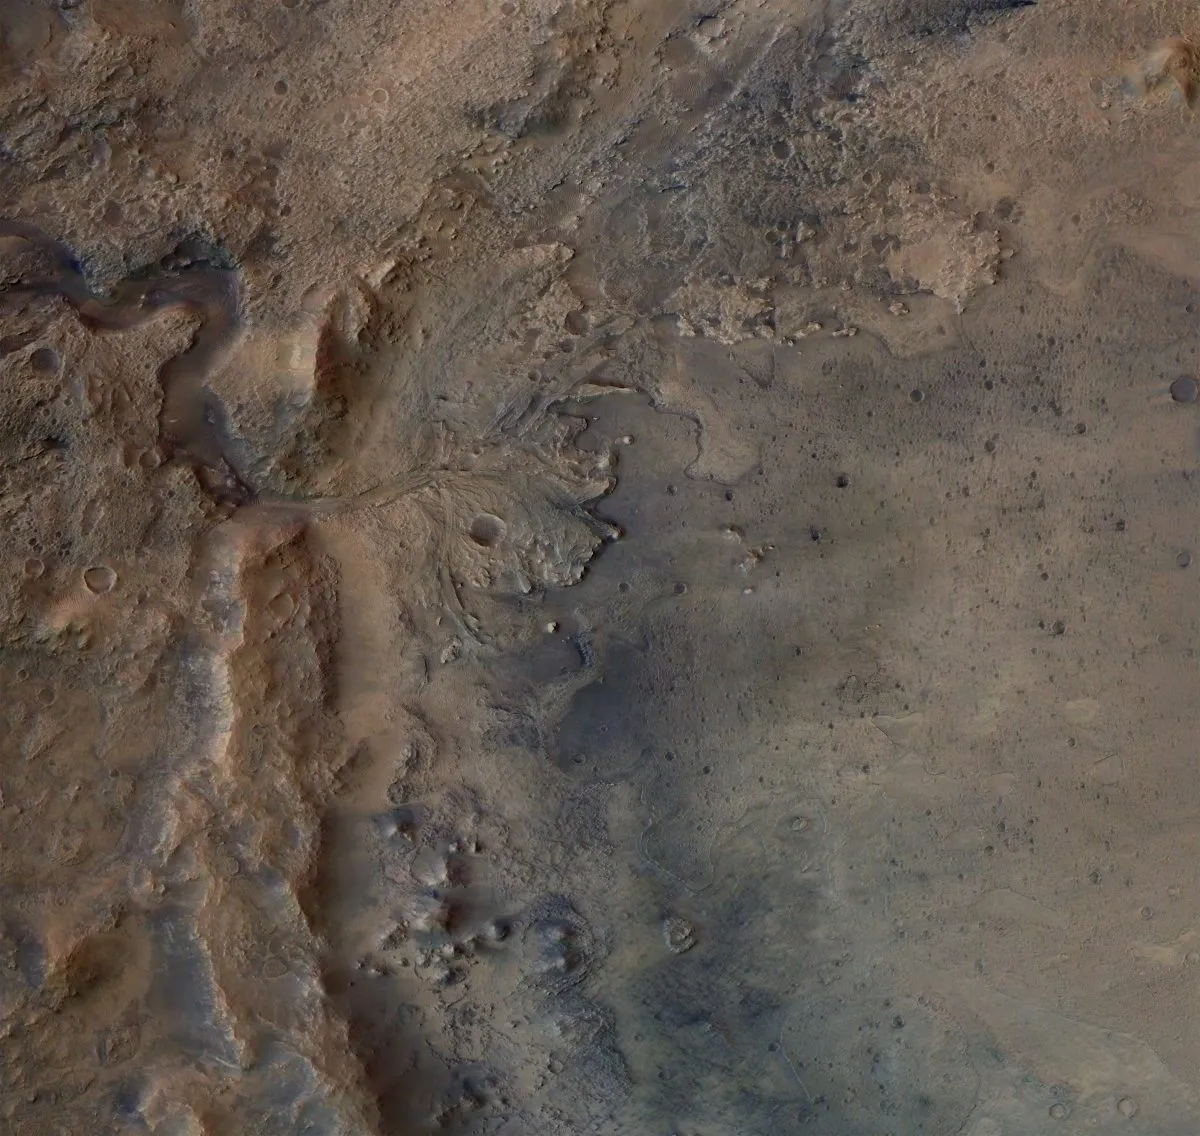 The remains of an ancient delta in Mars's Jezero Crater, as seen by the Mars Express Orbiter. Credit: ESA/DLR/FU-Berlin